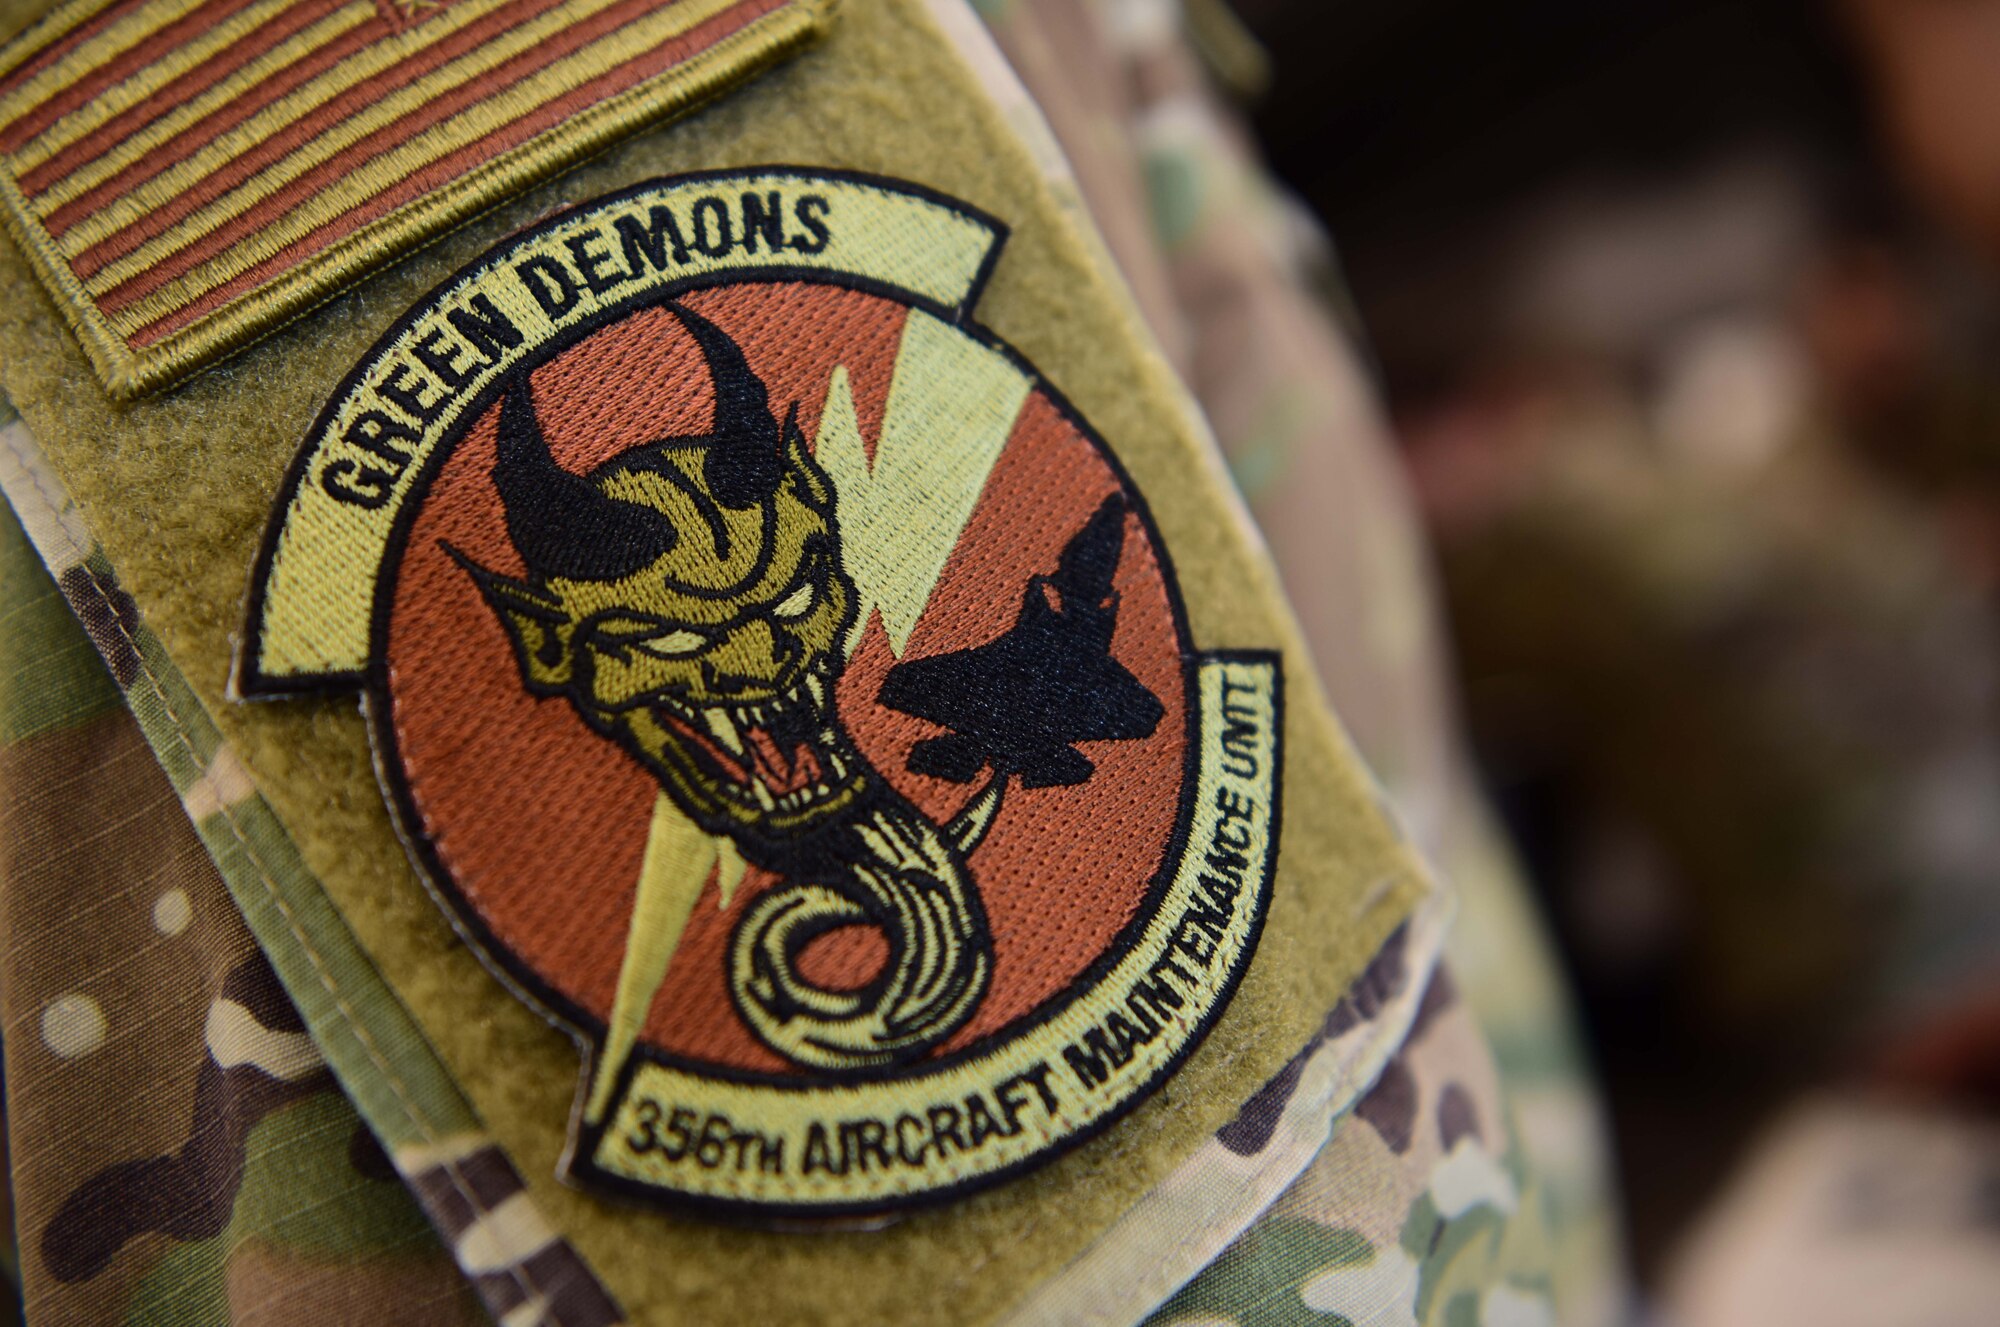 U.S. Air Force Staff Sgt. Christopher Mashek, a 356th Aircraft Maintenance Unit F-35A Lightning II crew chief, dons a Green Demons unit patch at Eielson Air Force Base, Alaska, May 1, 2020.